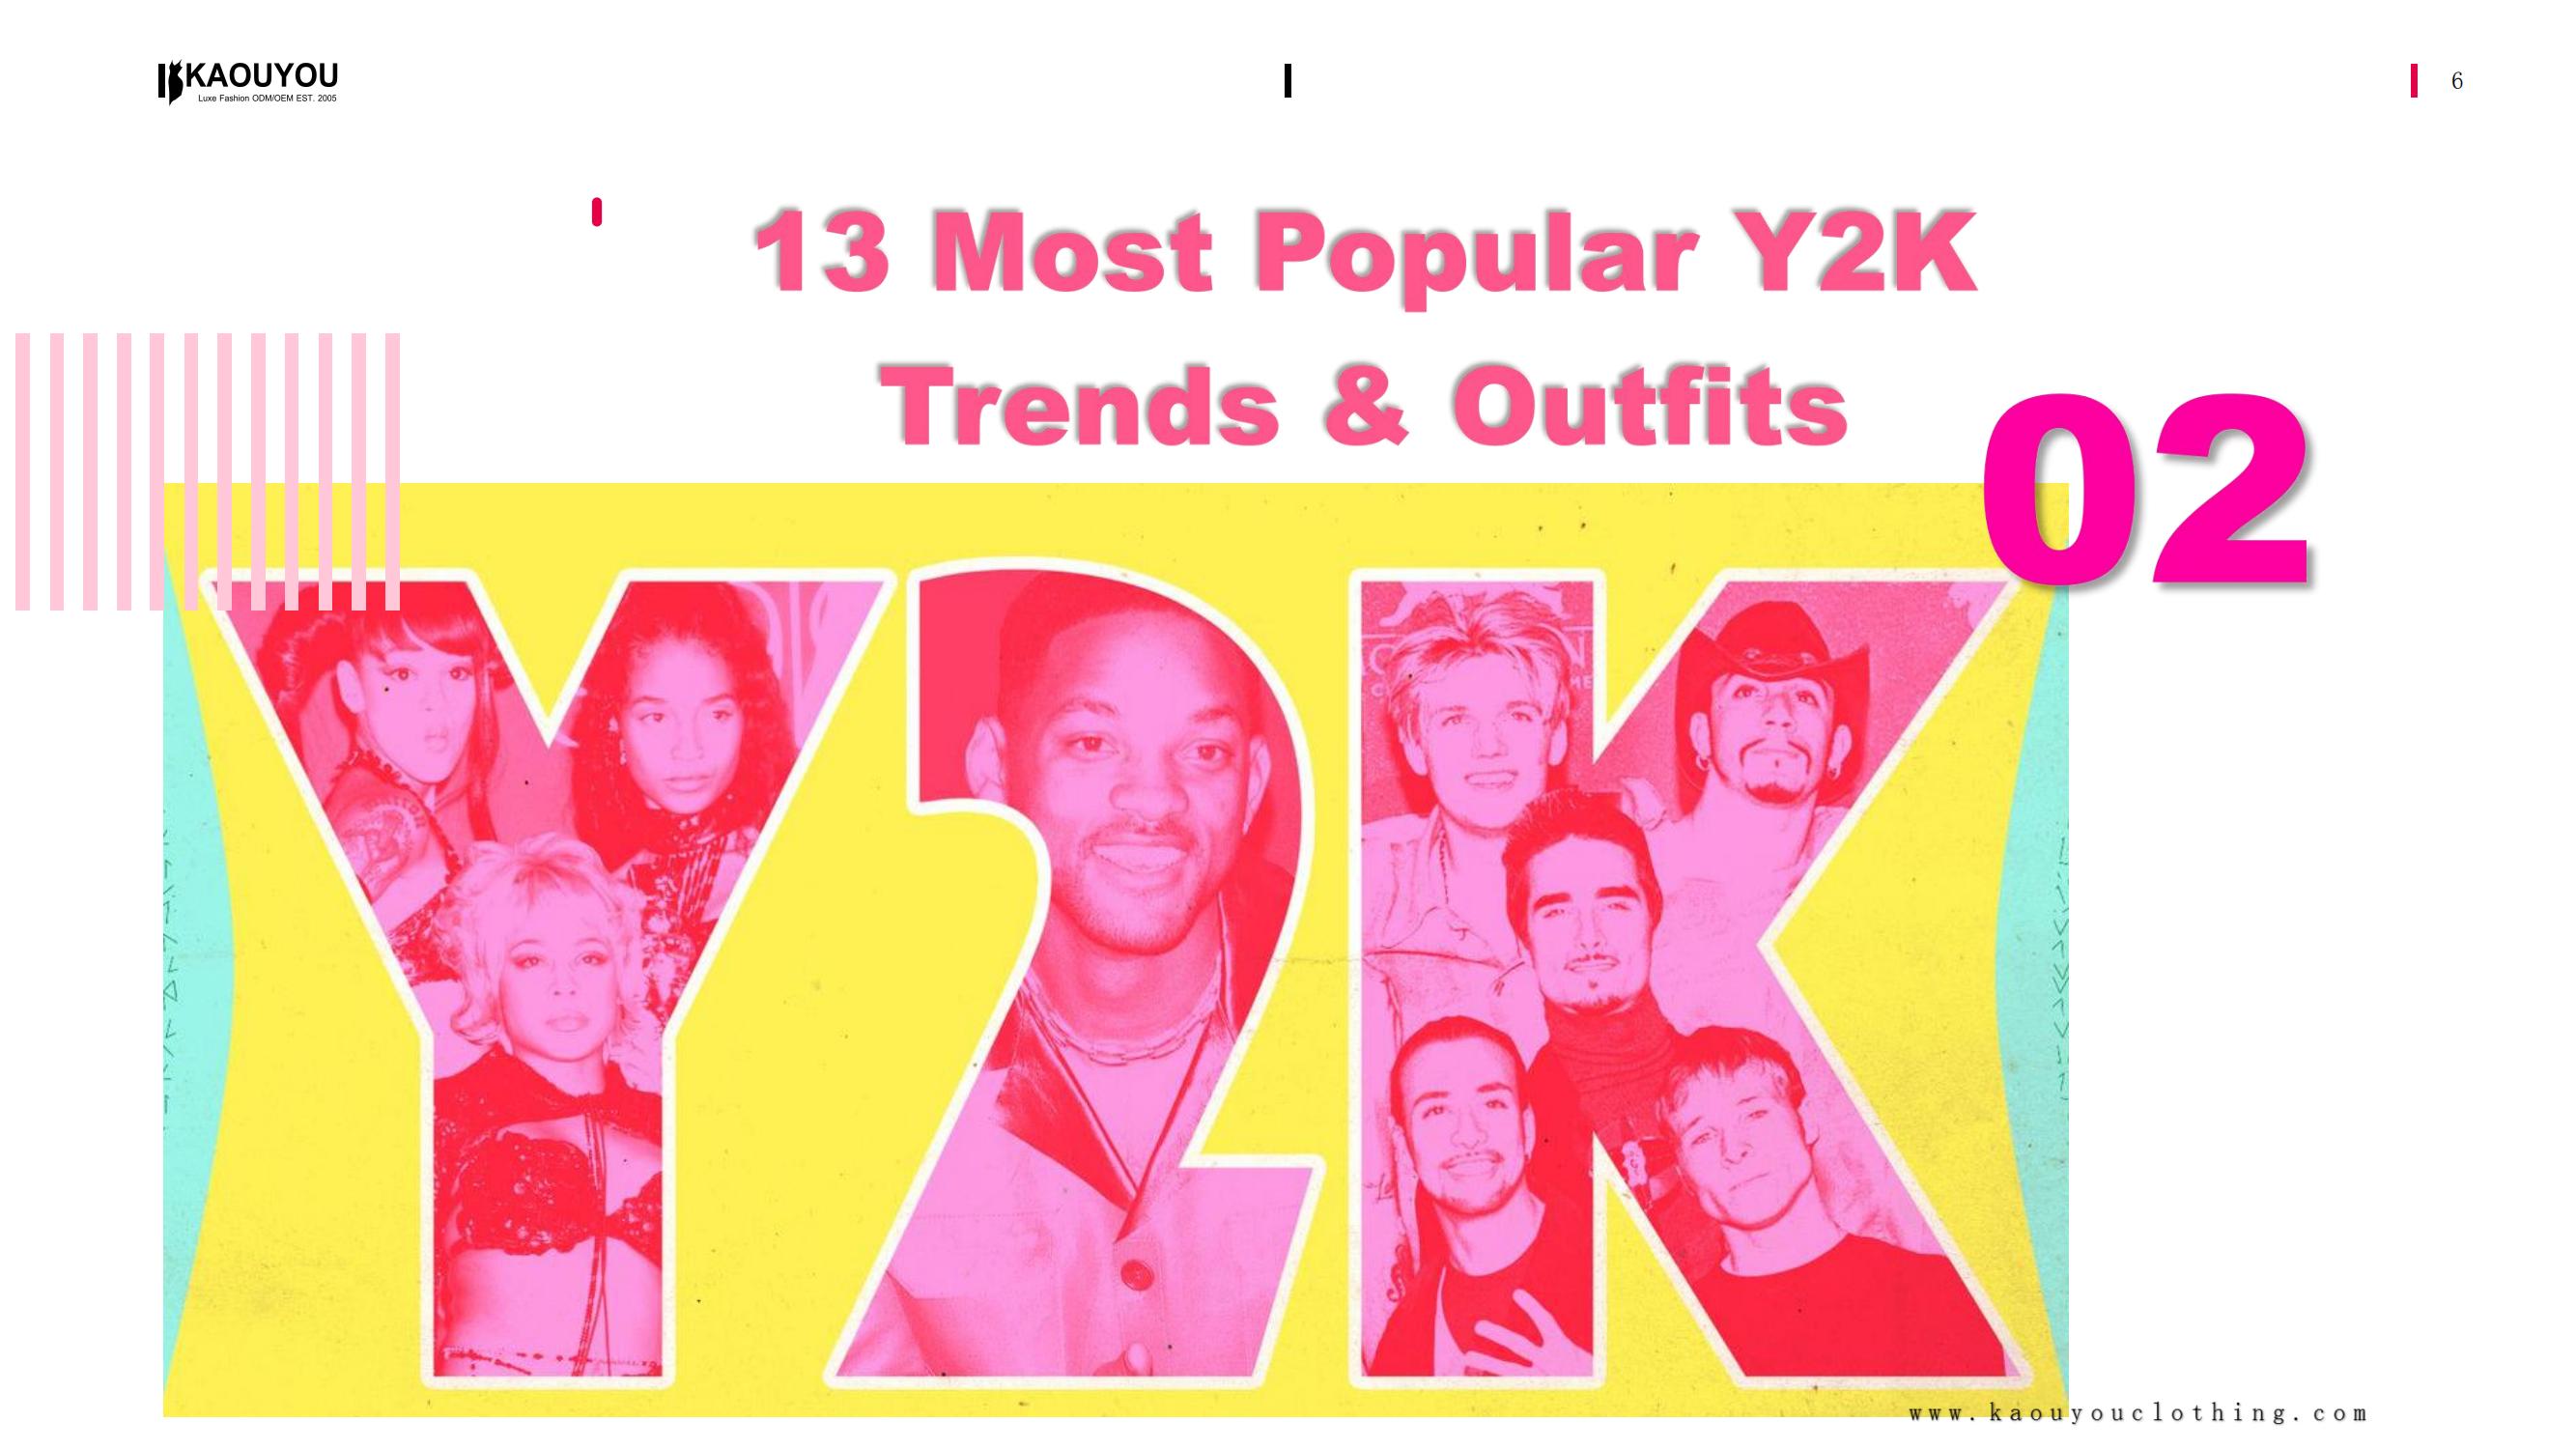 Will Y2K be the trend in 2022